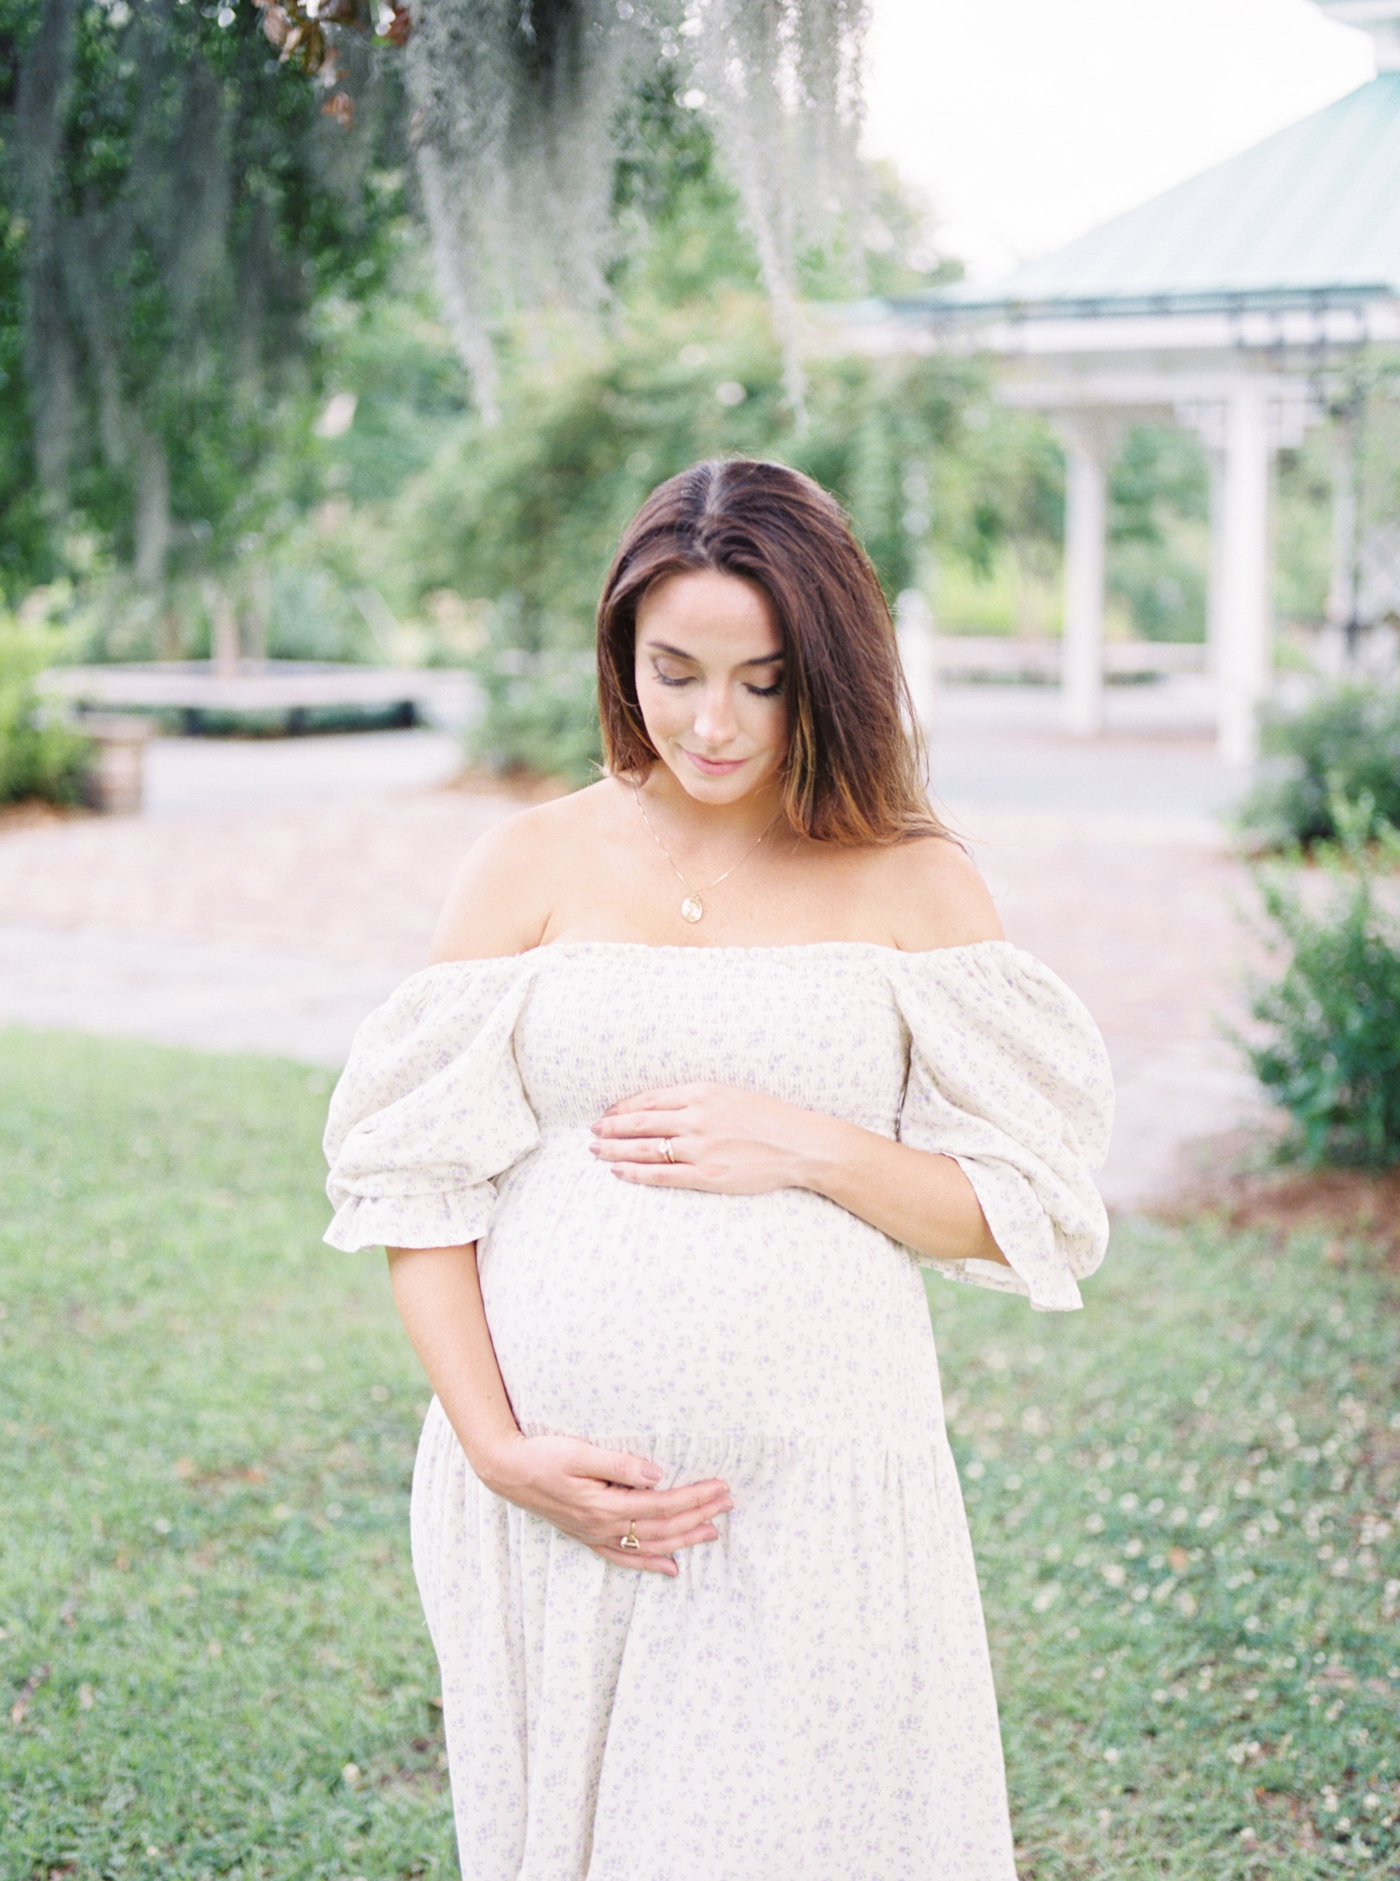 Expecting mother cradling her belly | Photo by Caitlyn Motycka Photography.